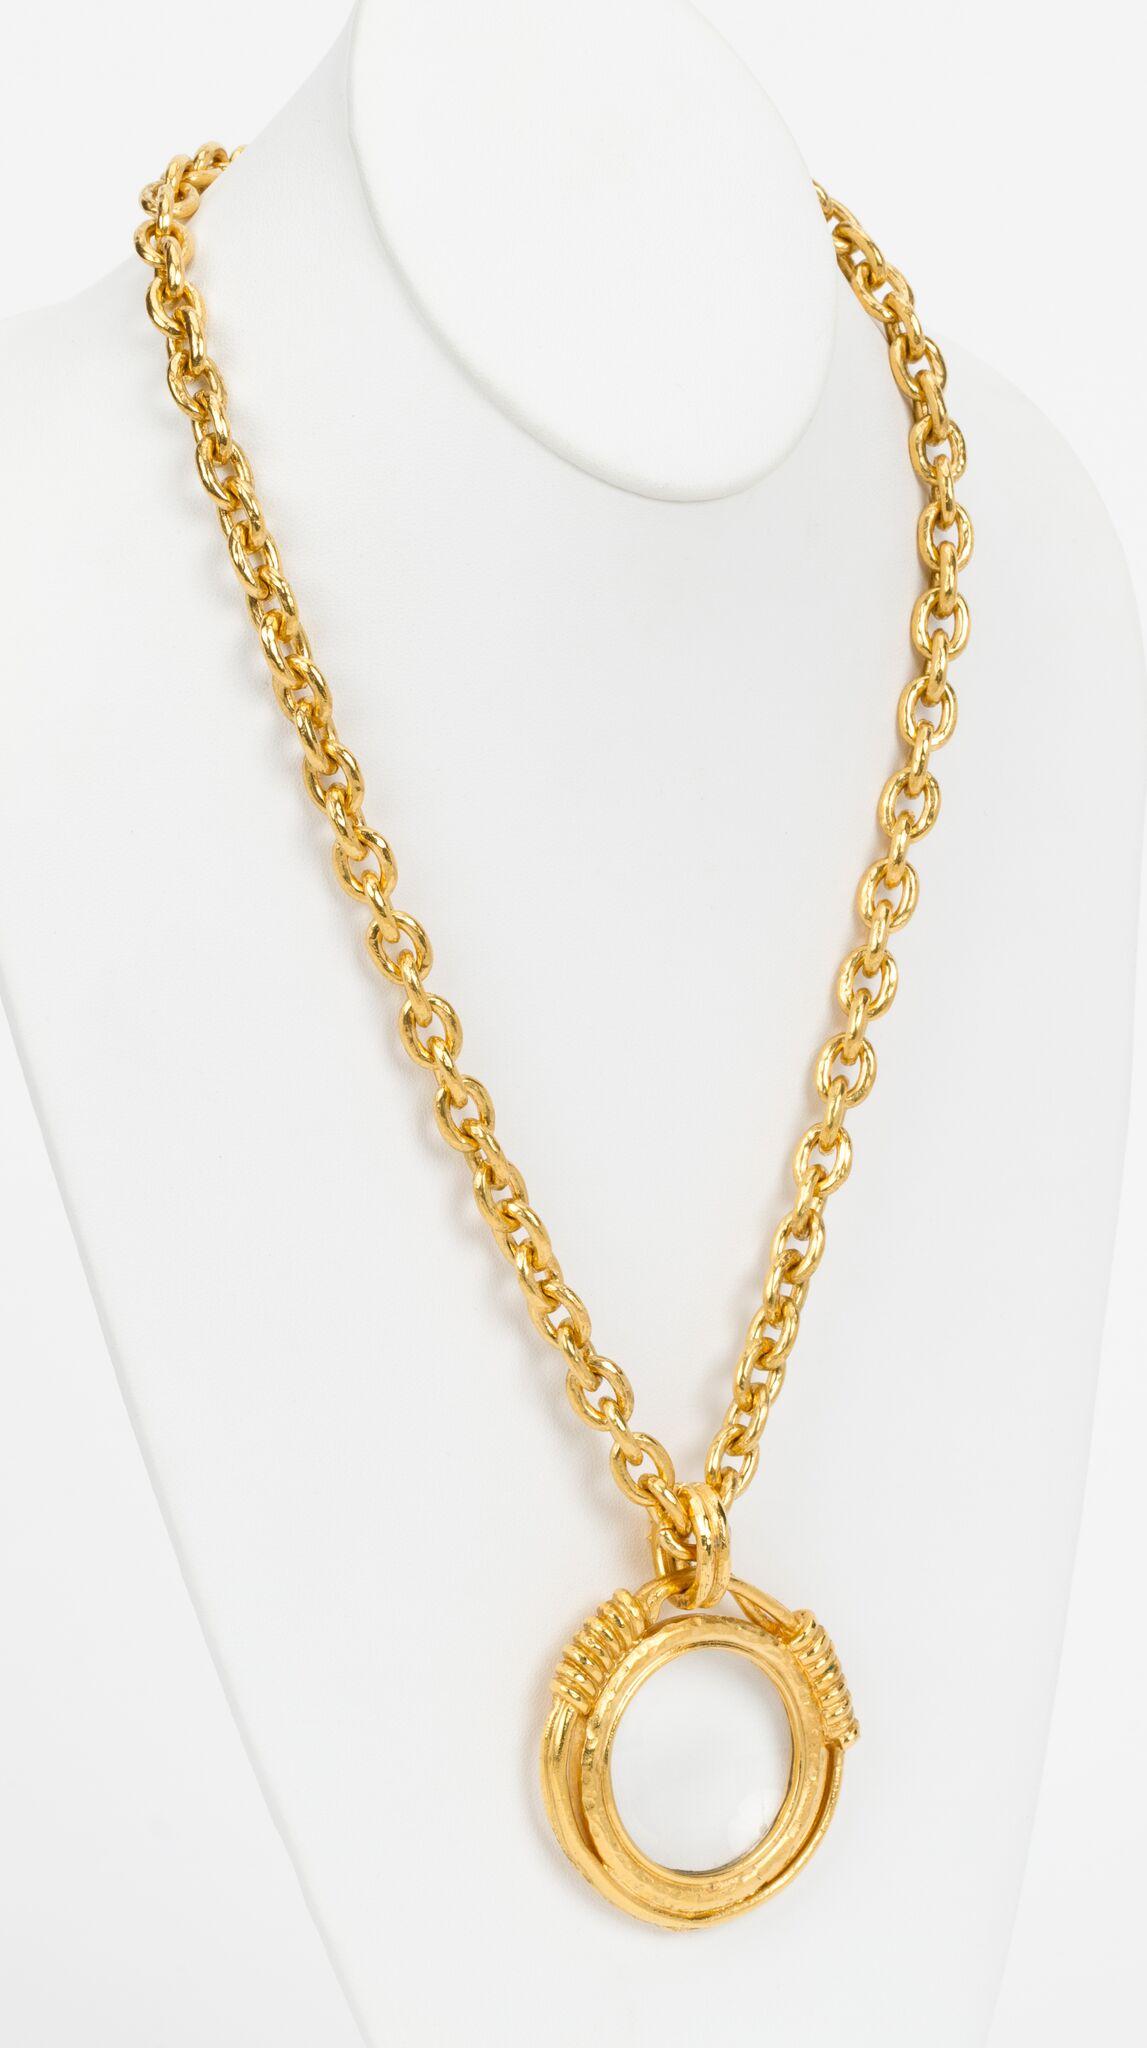 Chanel satin gold long chain magnifier necklace. 80s collection. Mint condition. Comes with original box.